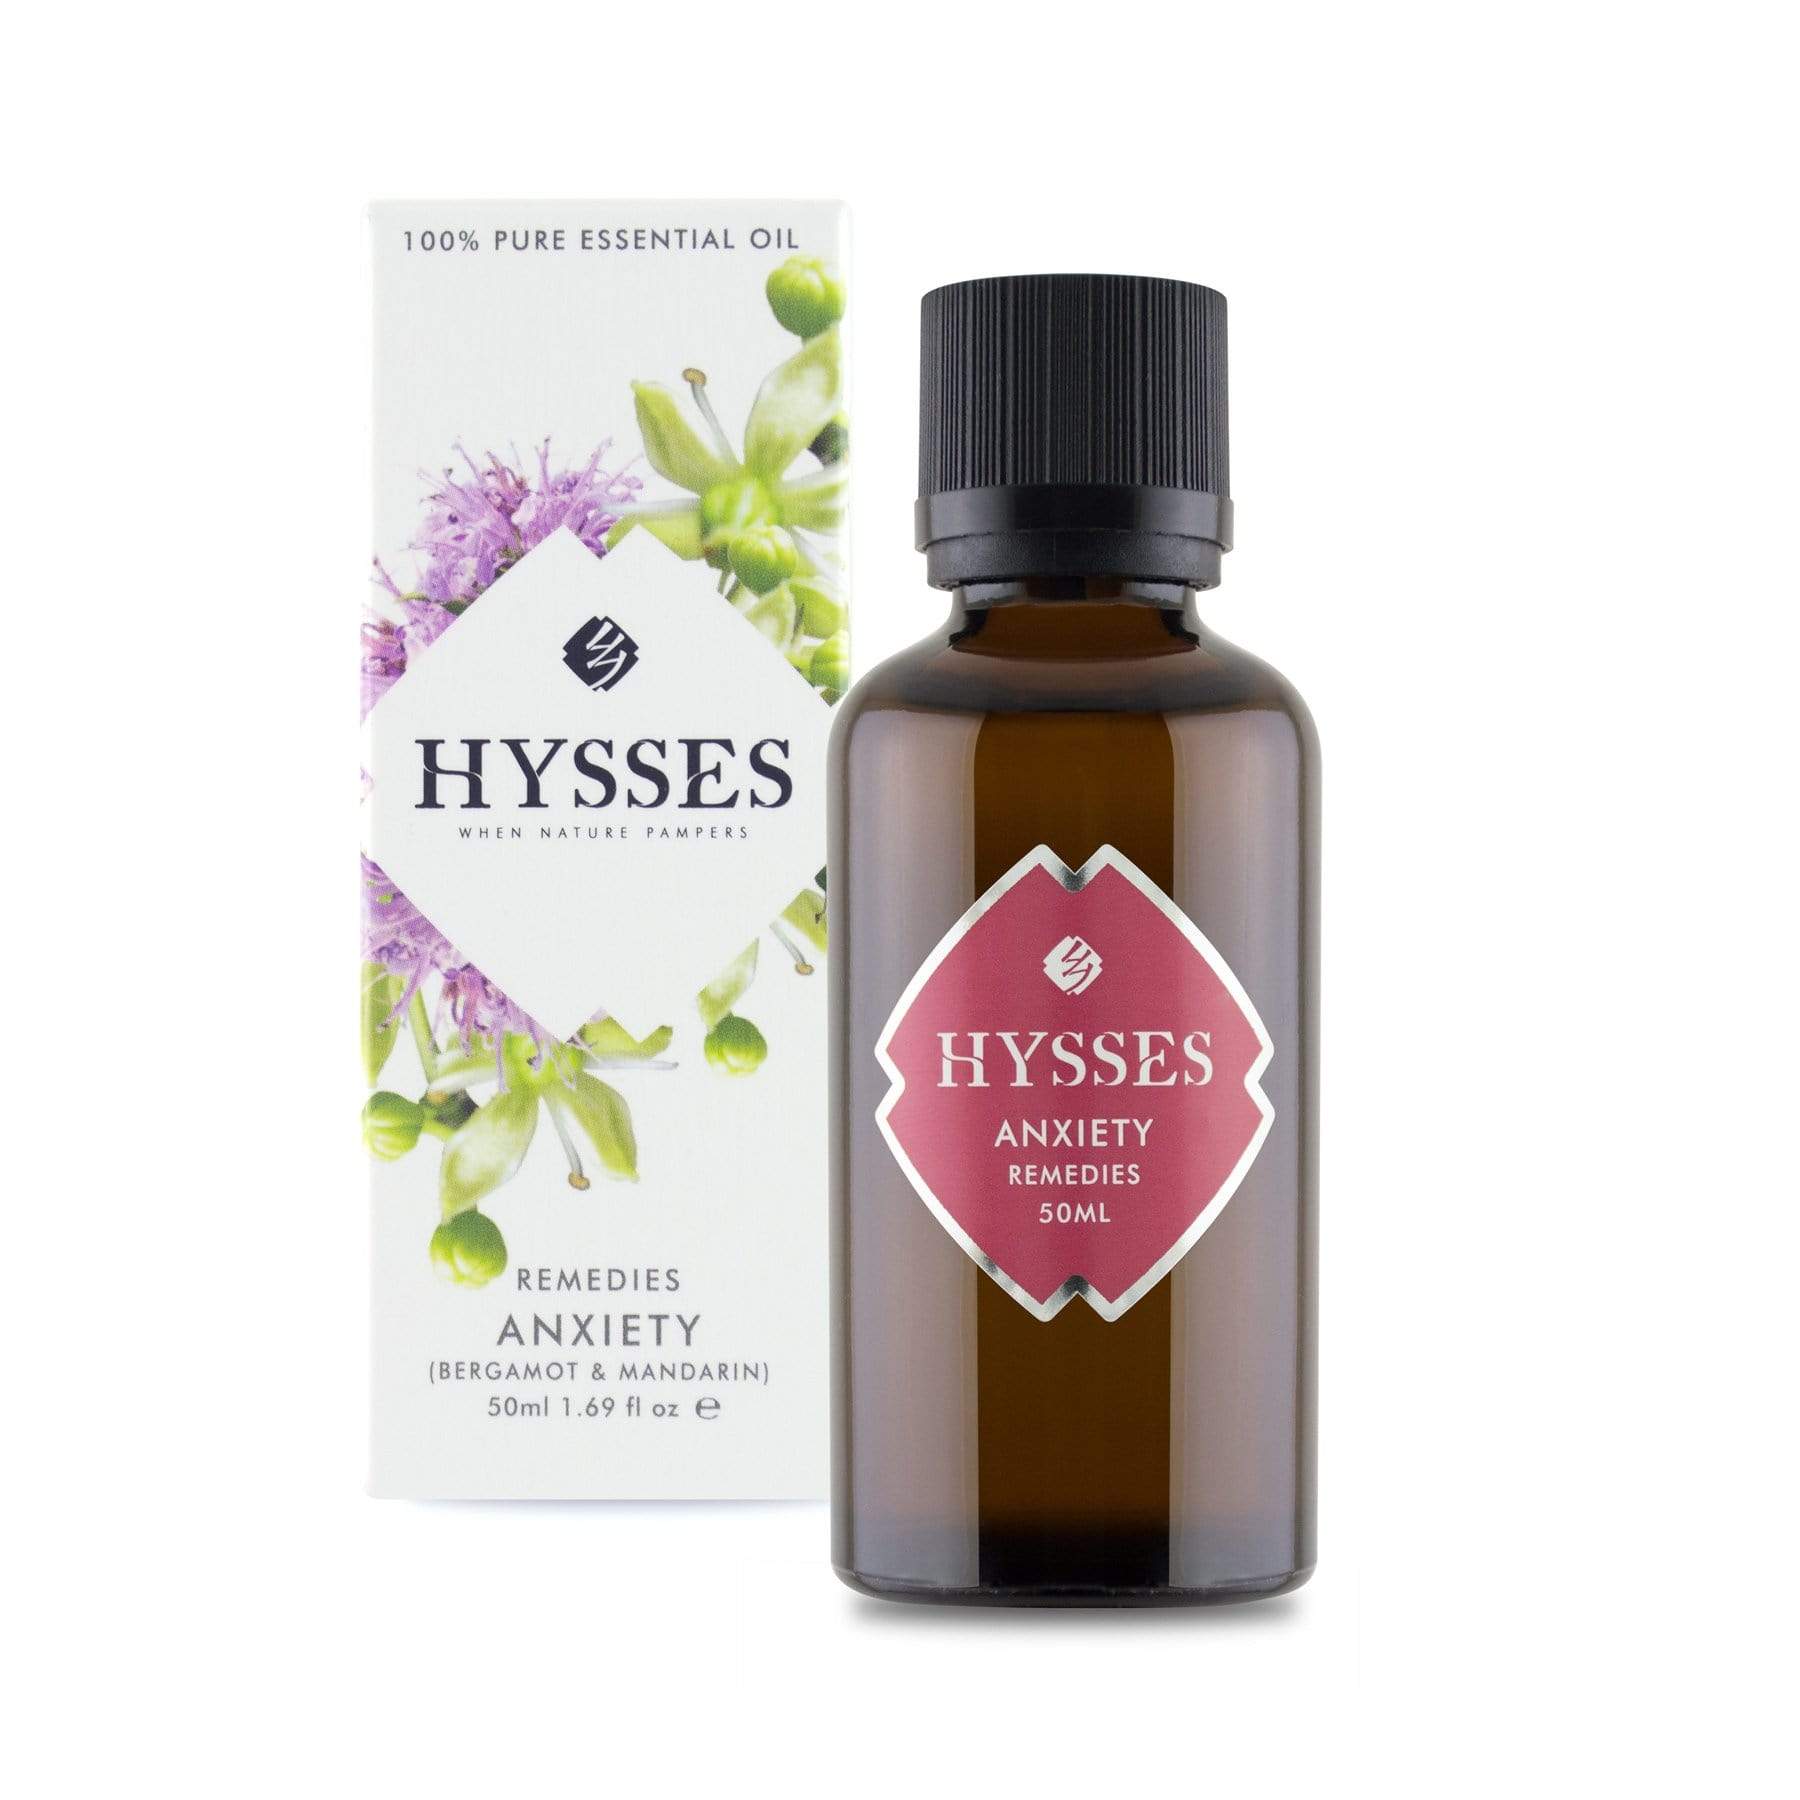 Hysses Essential Oil Remedies Anxiety, 50ml